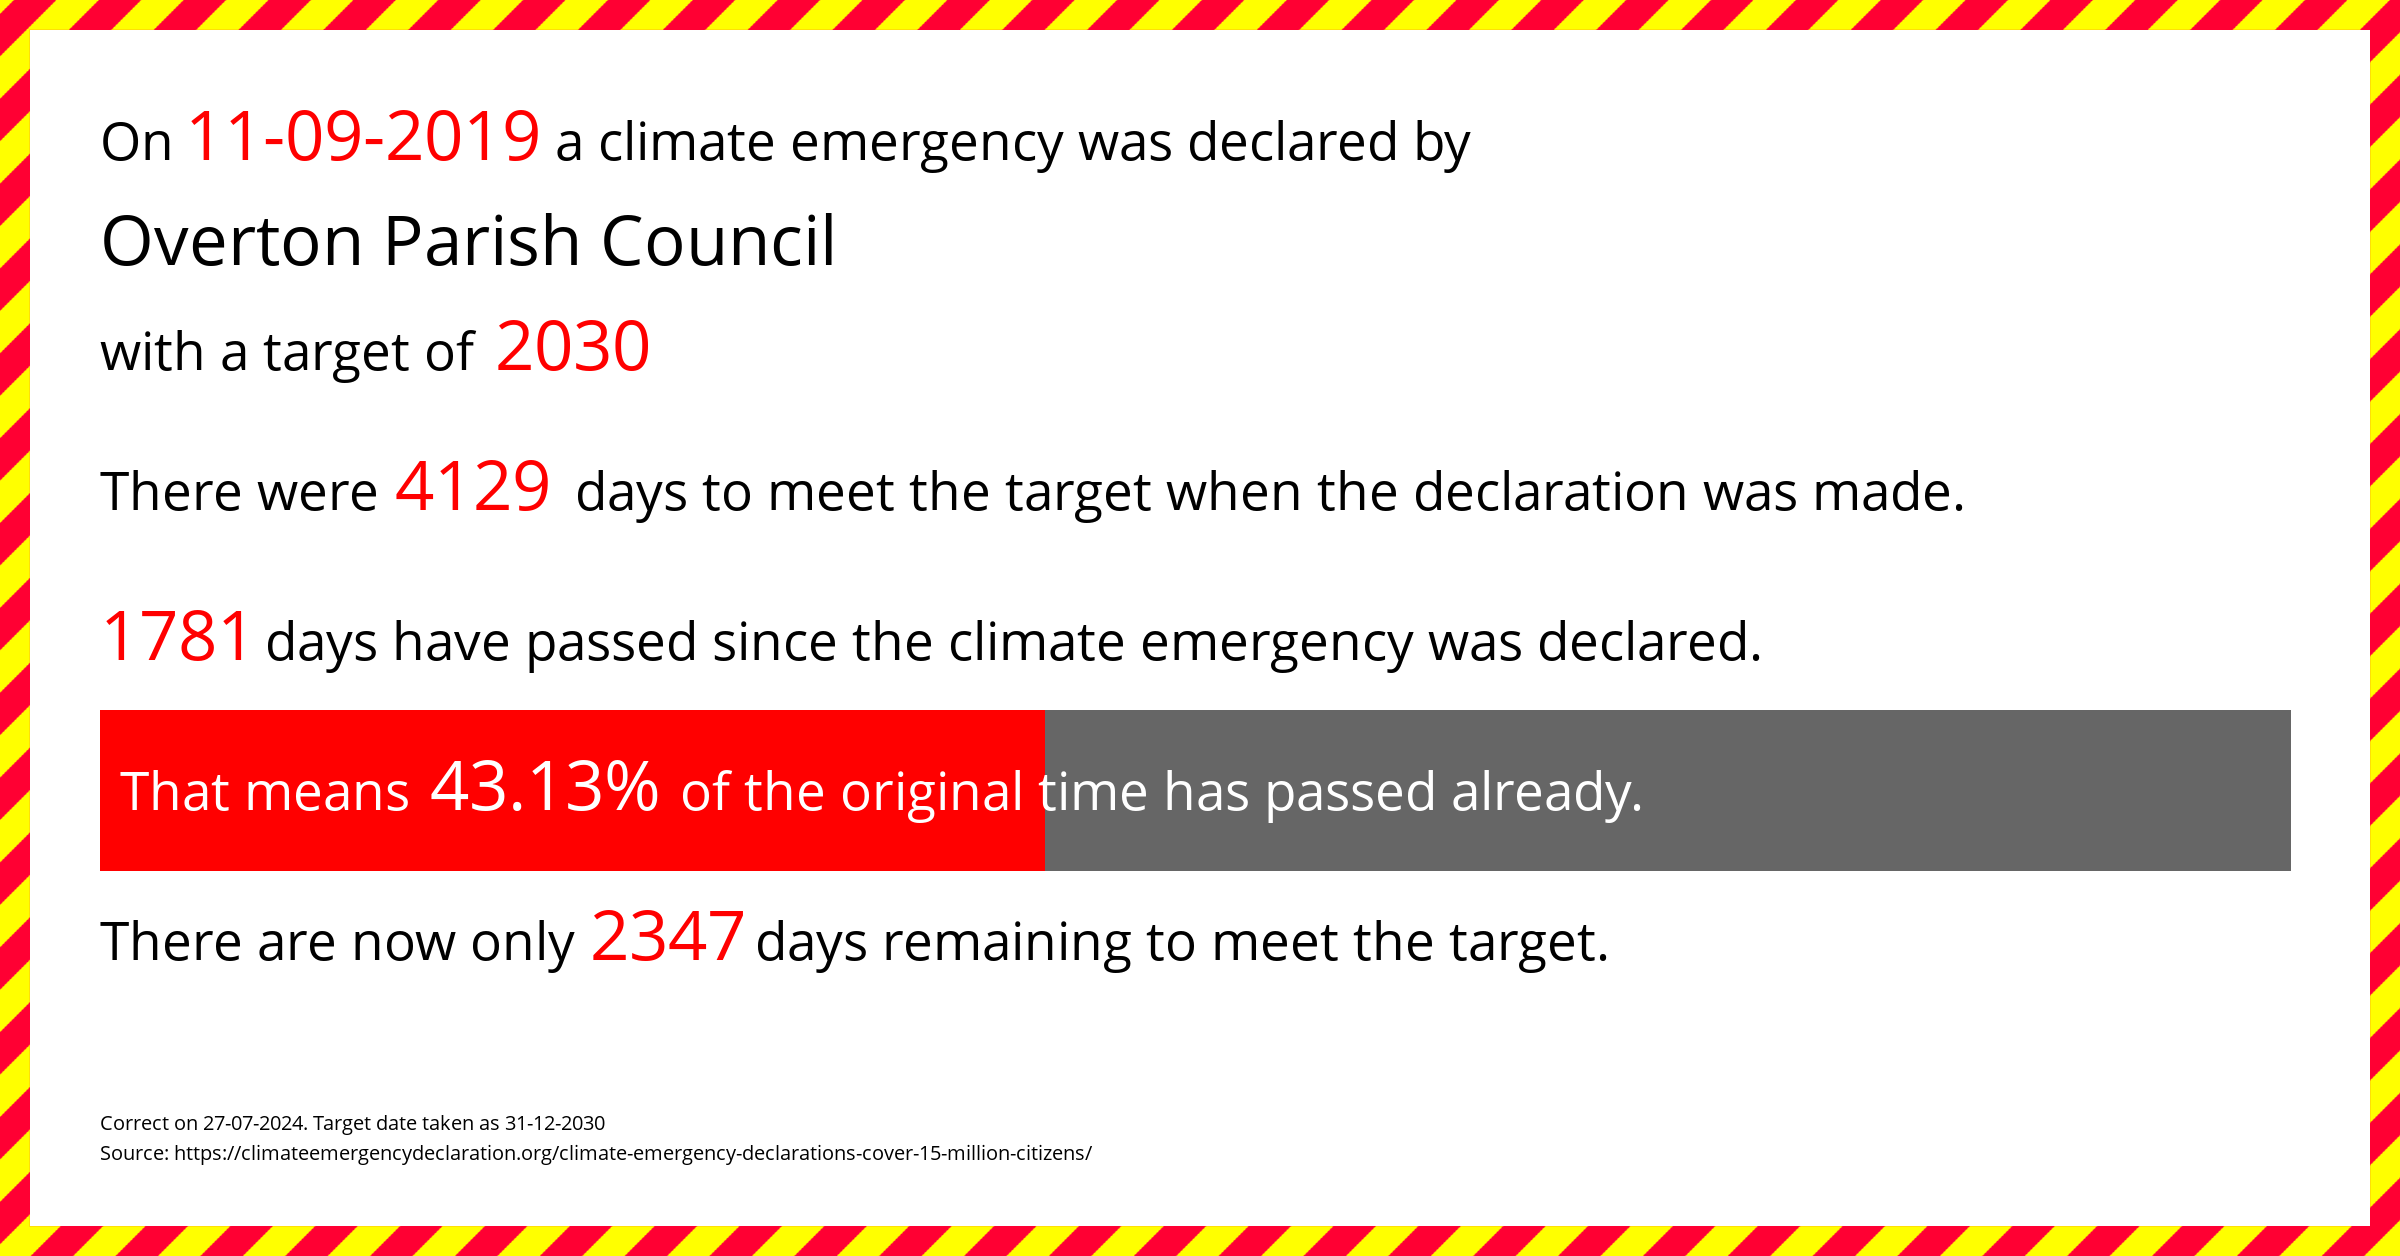 Overton Parish Council  declared a Climate emergency on Wednesday 11th September 2019, with a target of 2030.